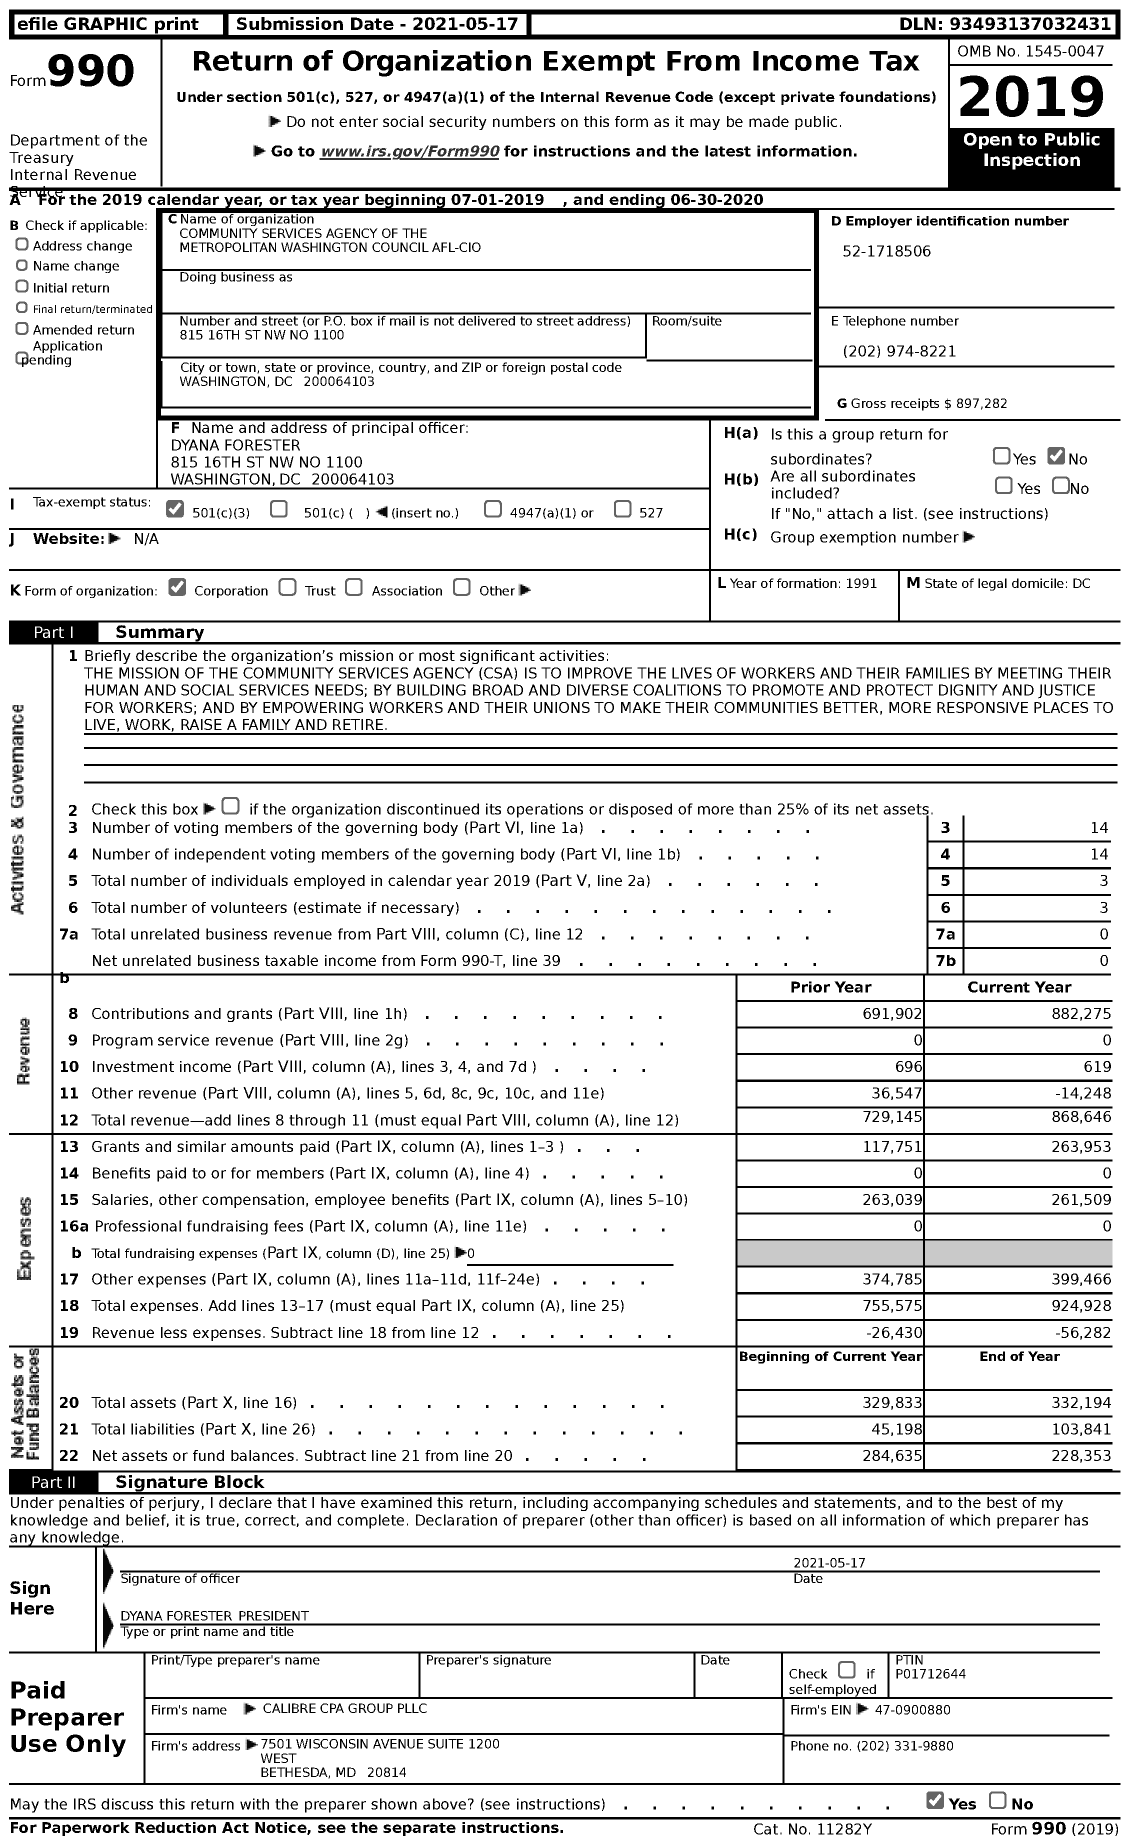 Image of first page of 2019 Form 990 for Community Services Agency of the Metropolitan Washington Council AFL-CIO